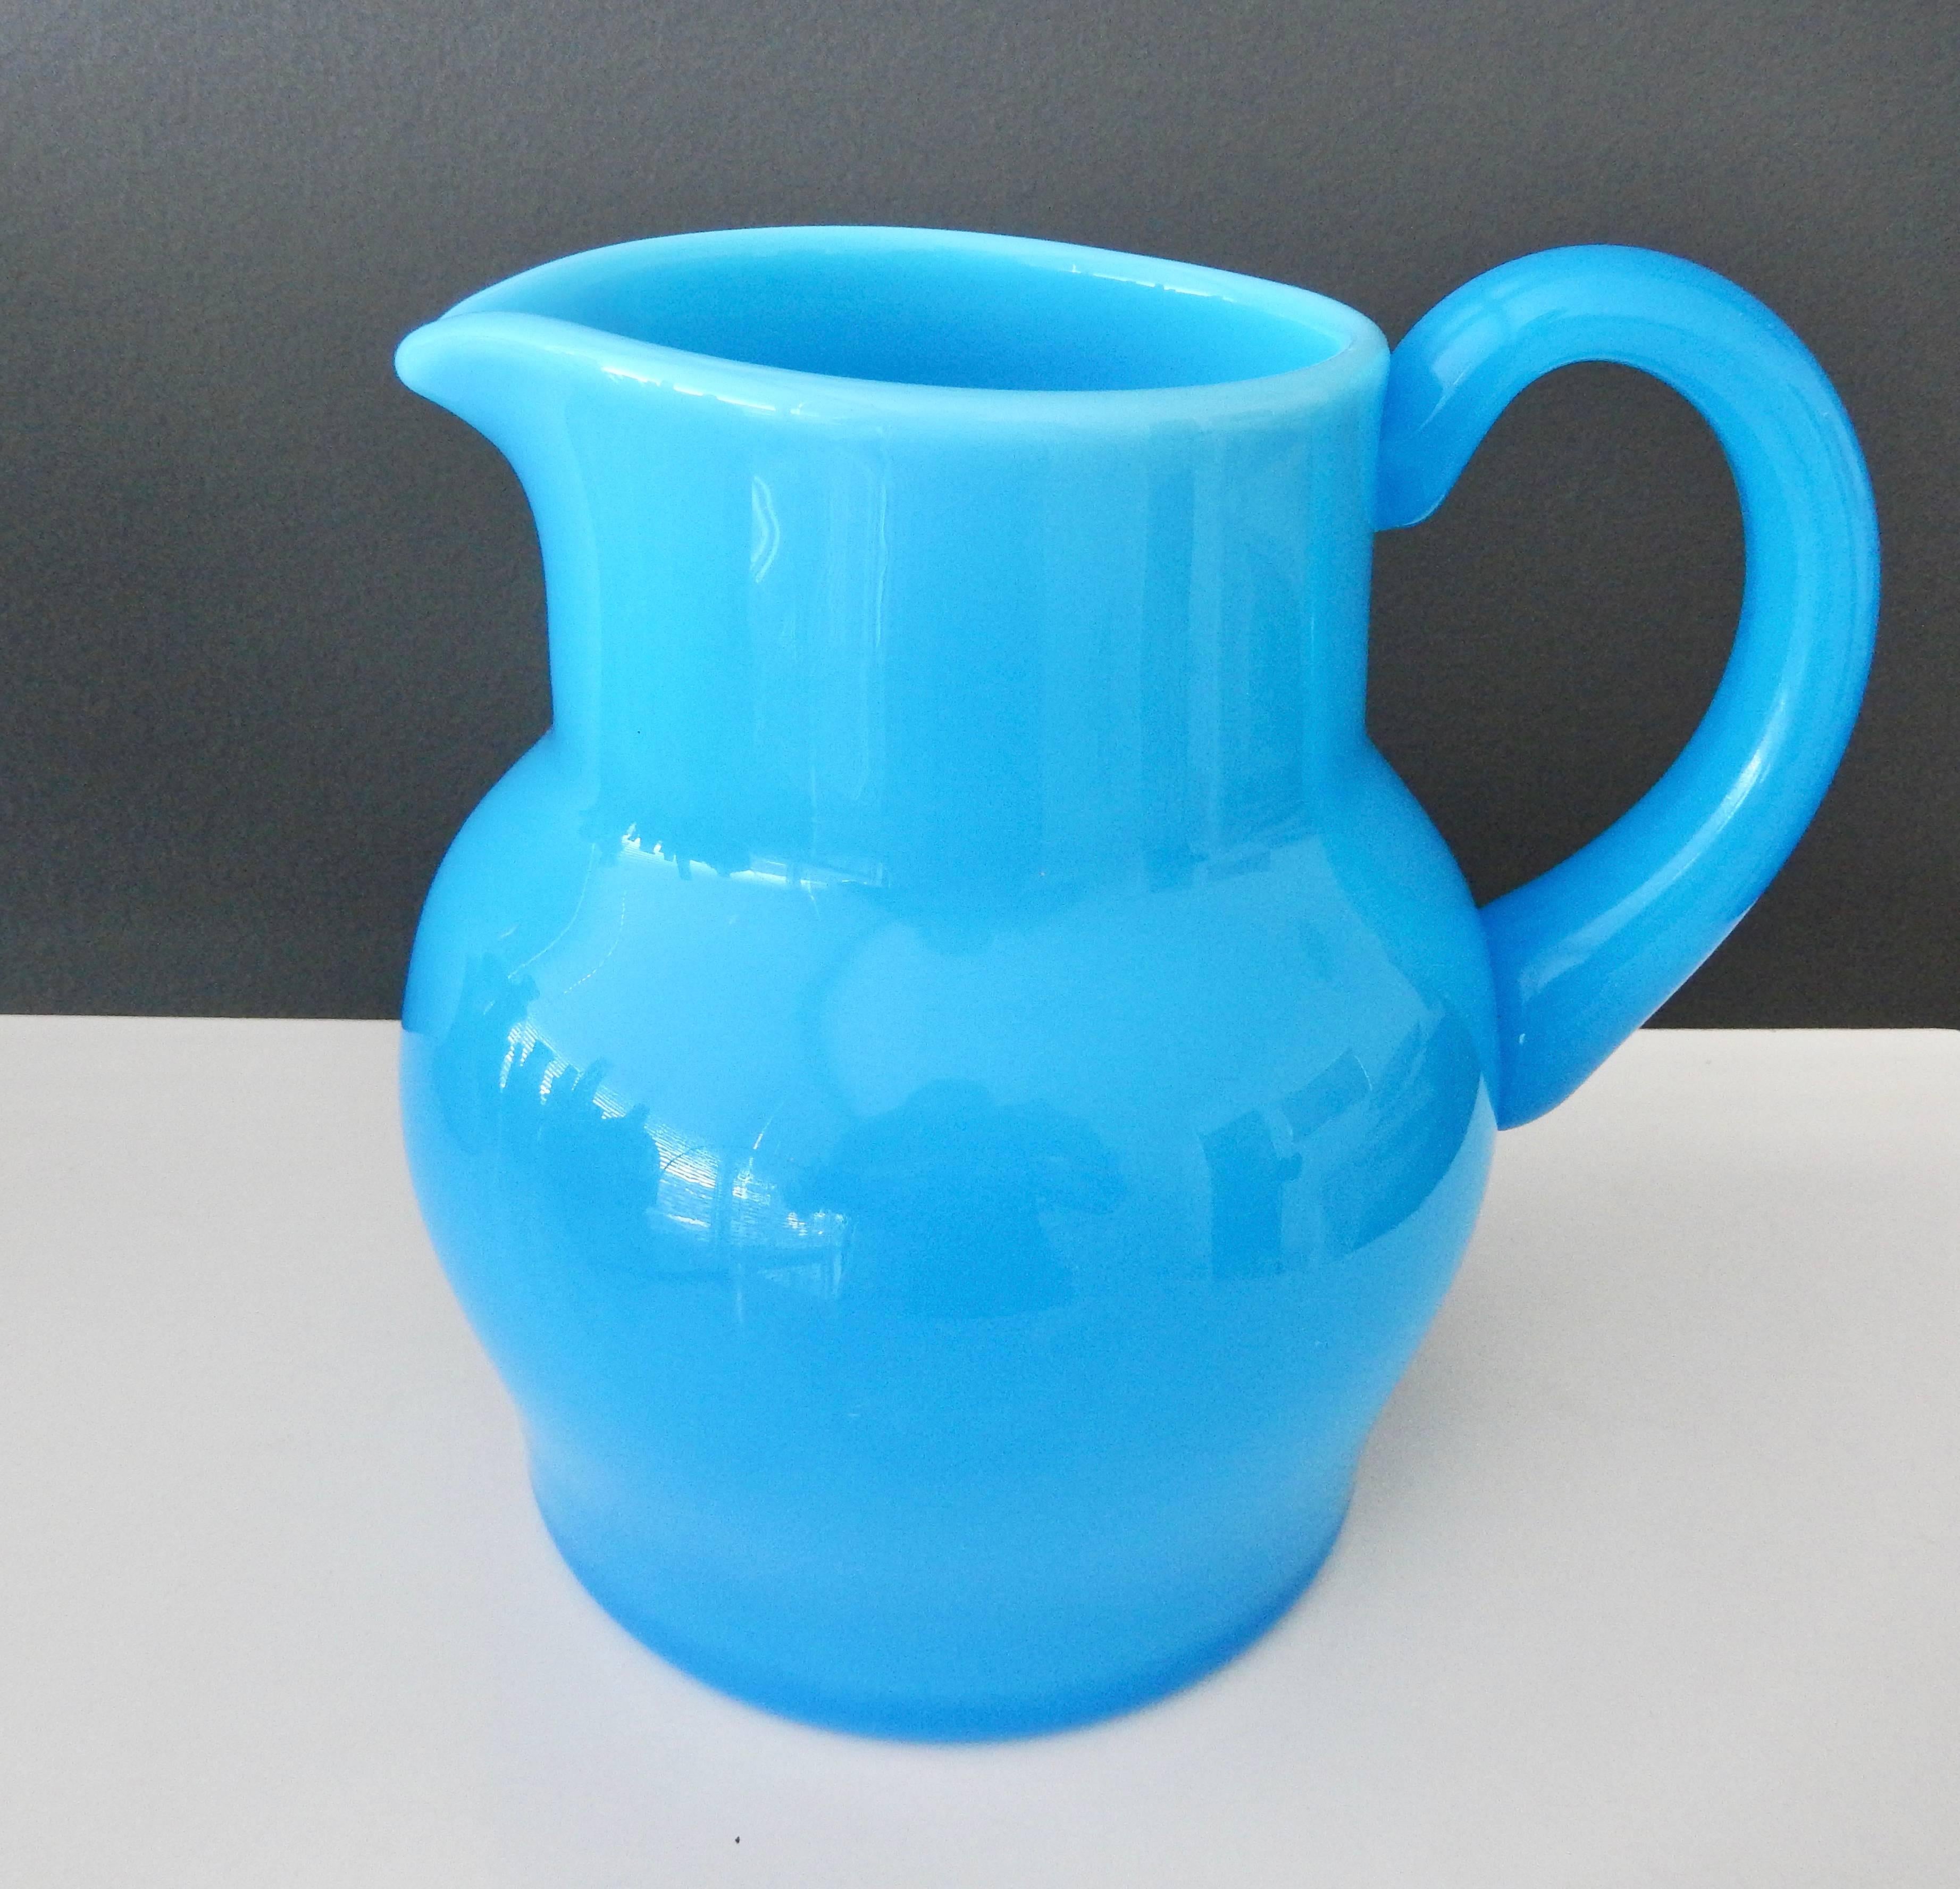 A scarce, opaque blue glass pitcher by the Swedish artist Erik Hoglund (1932-1998).  A simple, elegant example of modernist glass by this Swedish master.  Signed.

Reference:  A similar piece is in view in the Miller House, Indianapolis Museum of